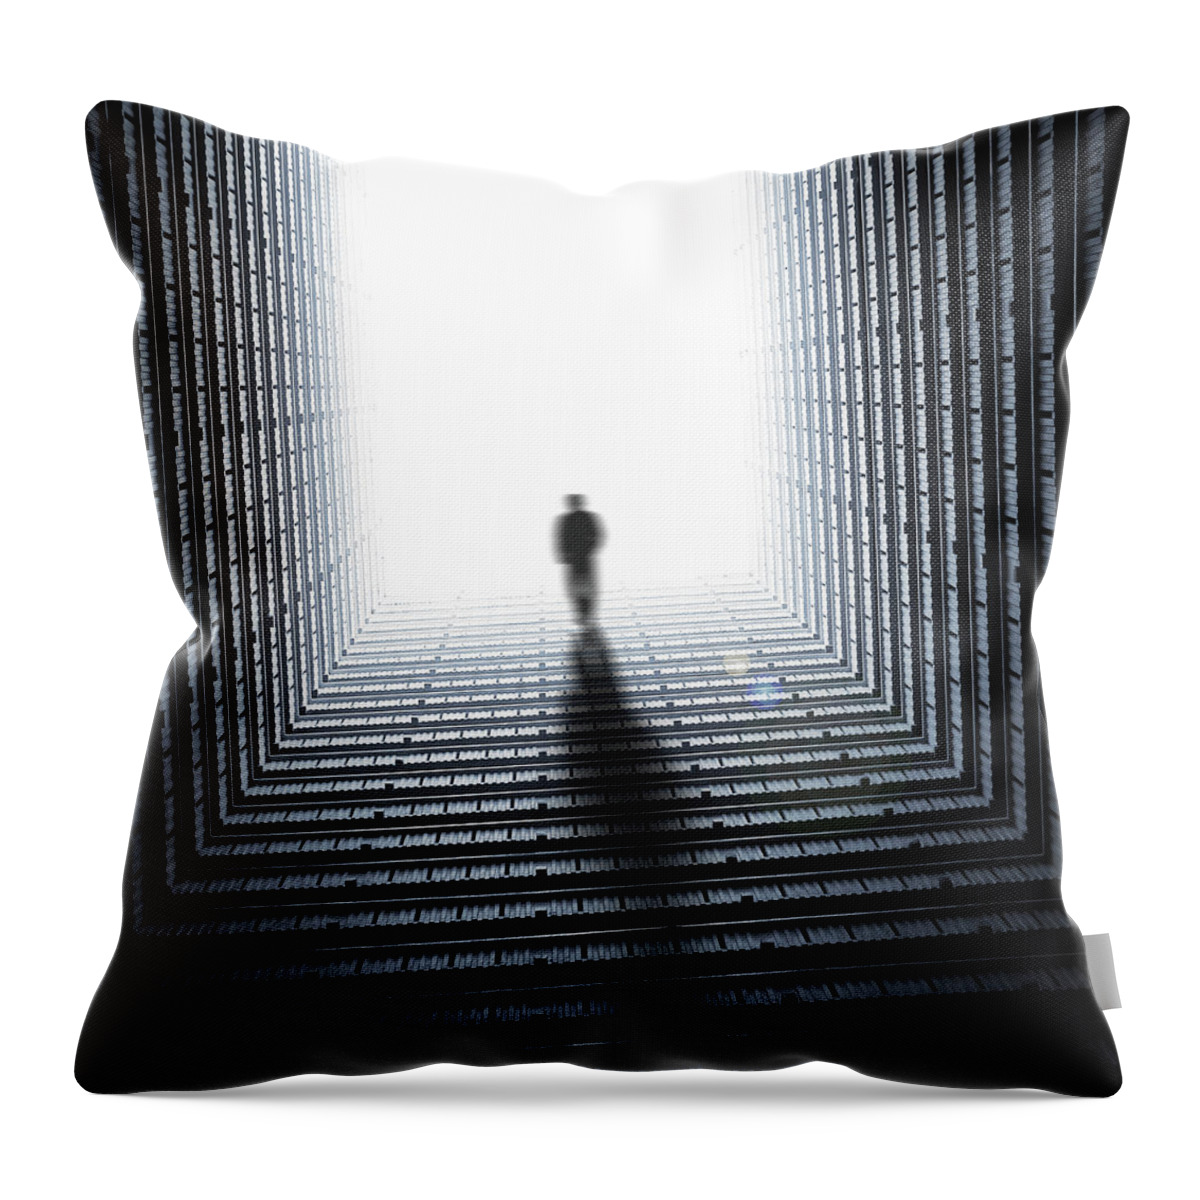 Dark Throw Pillow featuring the digital art Tunnel by Zoltan Toth